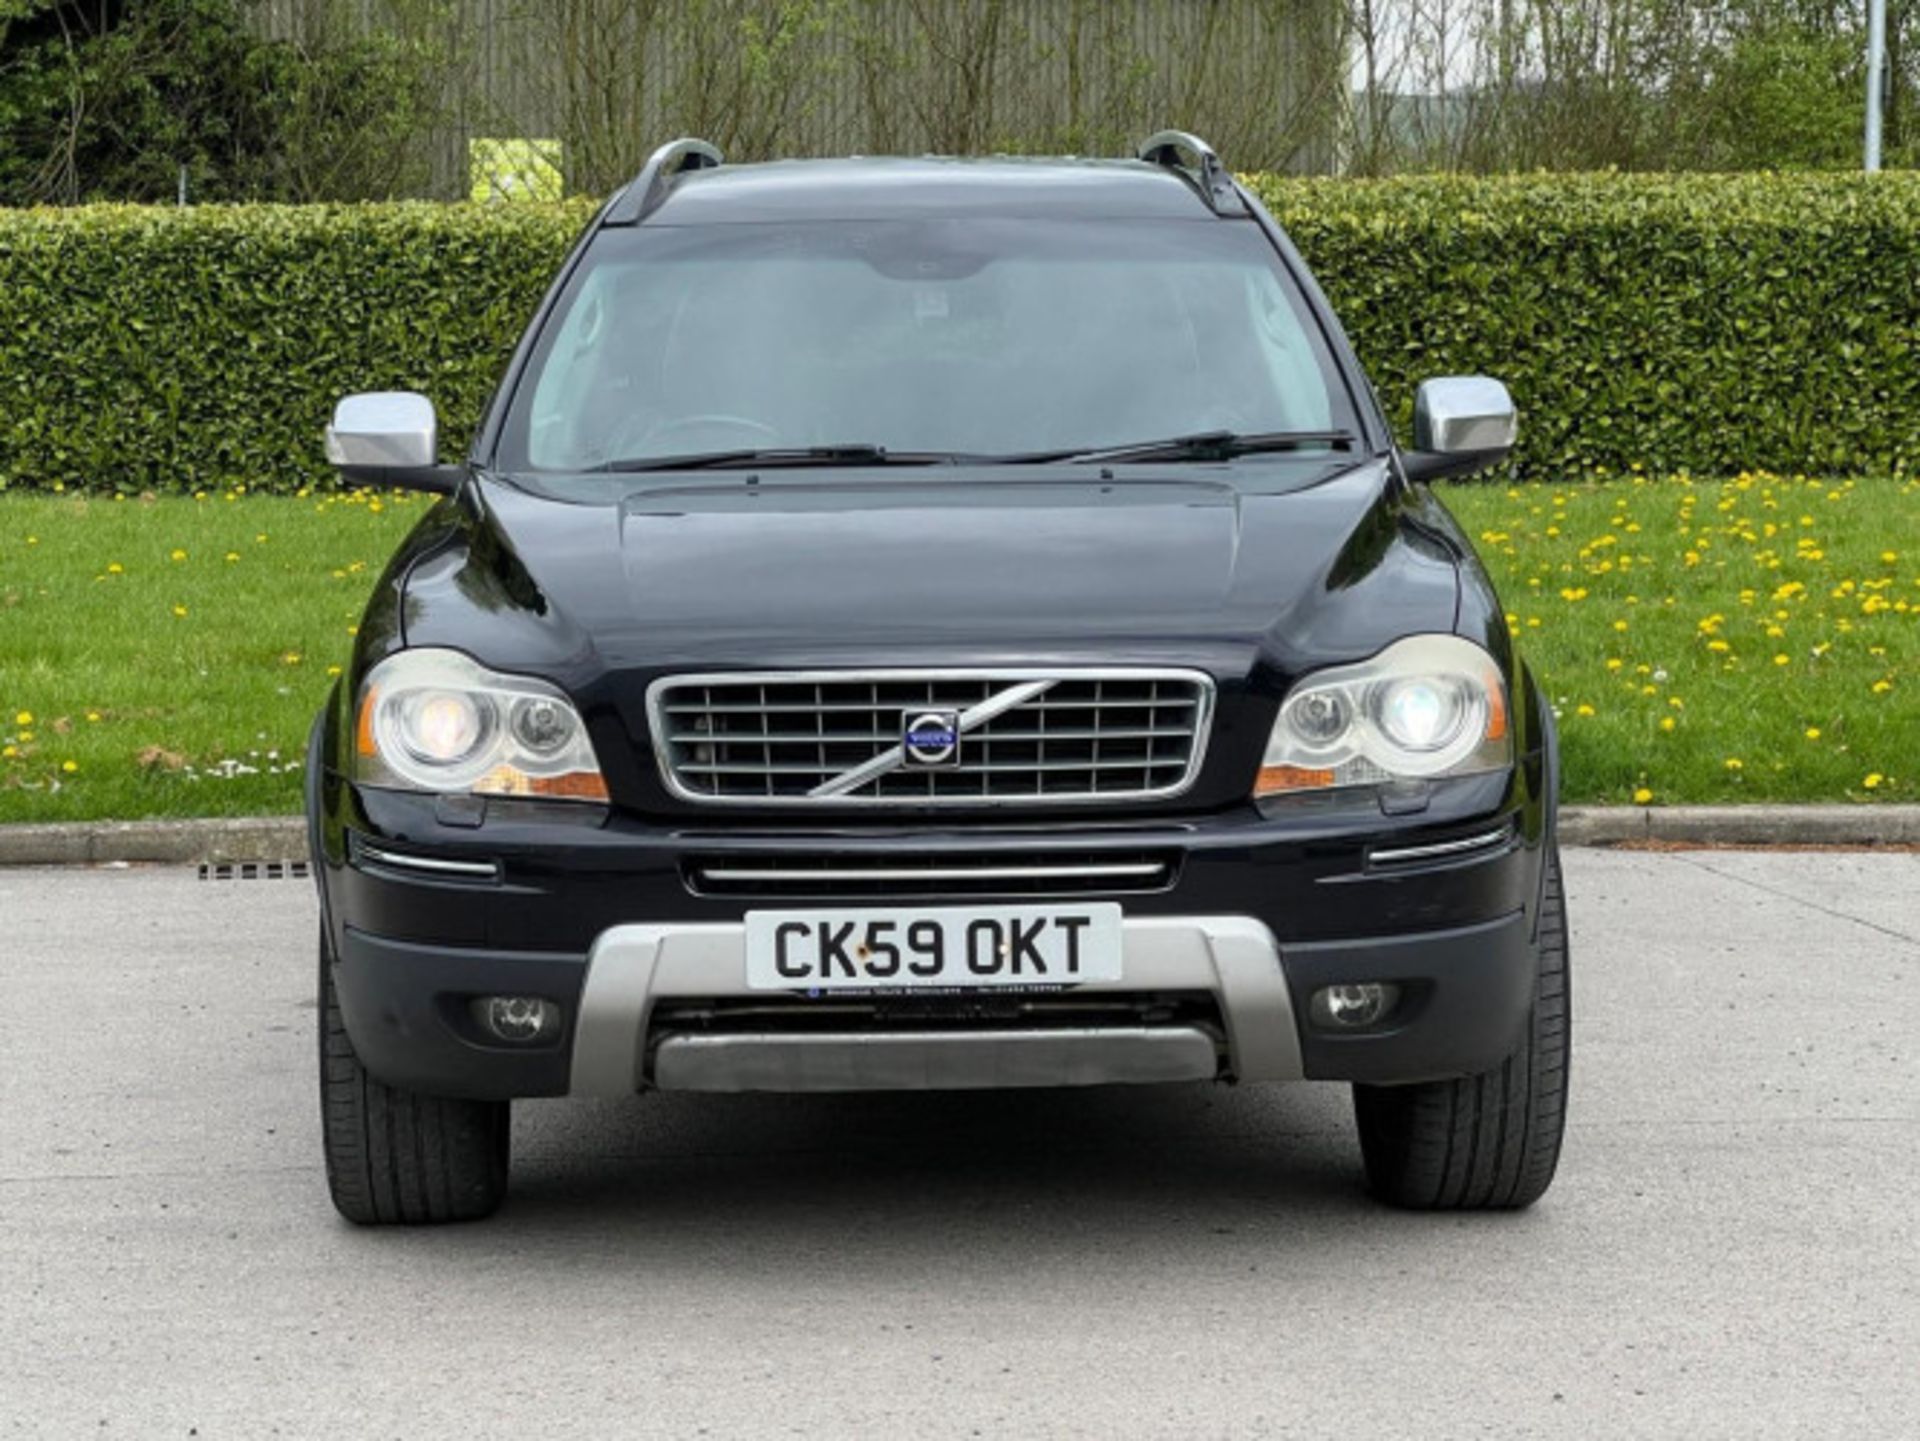 VOLVO XC90 2.4 D5 EXECUTIVE GEARTRONIC AWD, 5DR >>--NO VAT ON HAMMER--<< - Image 9 of 136